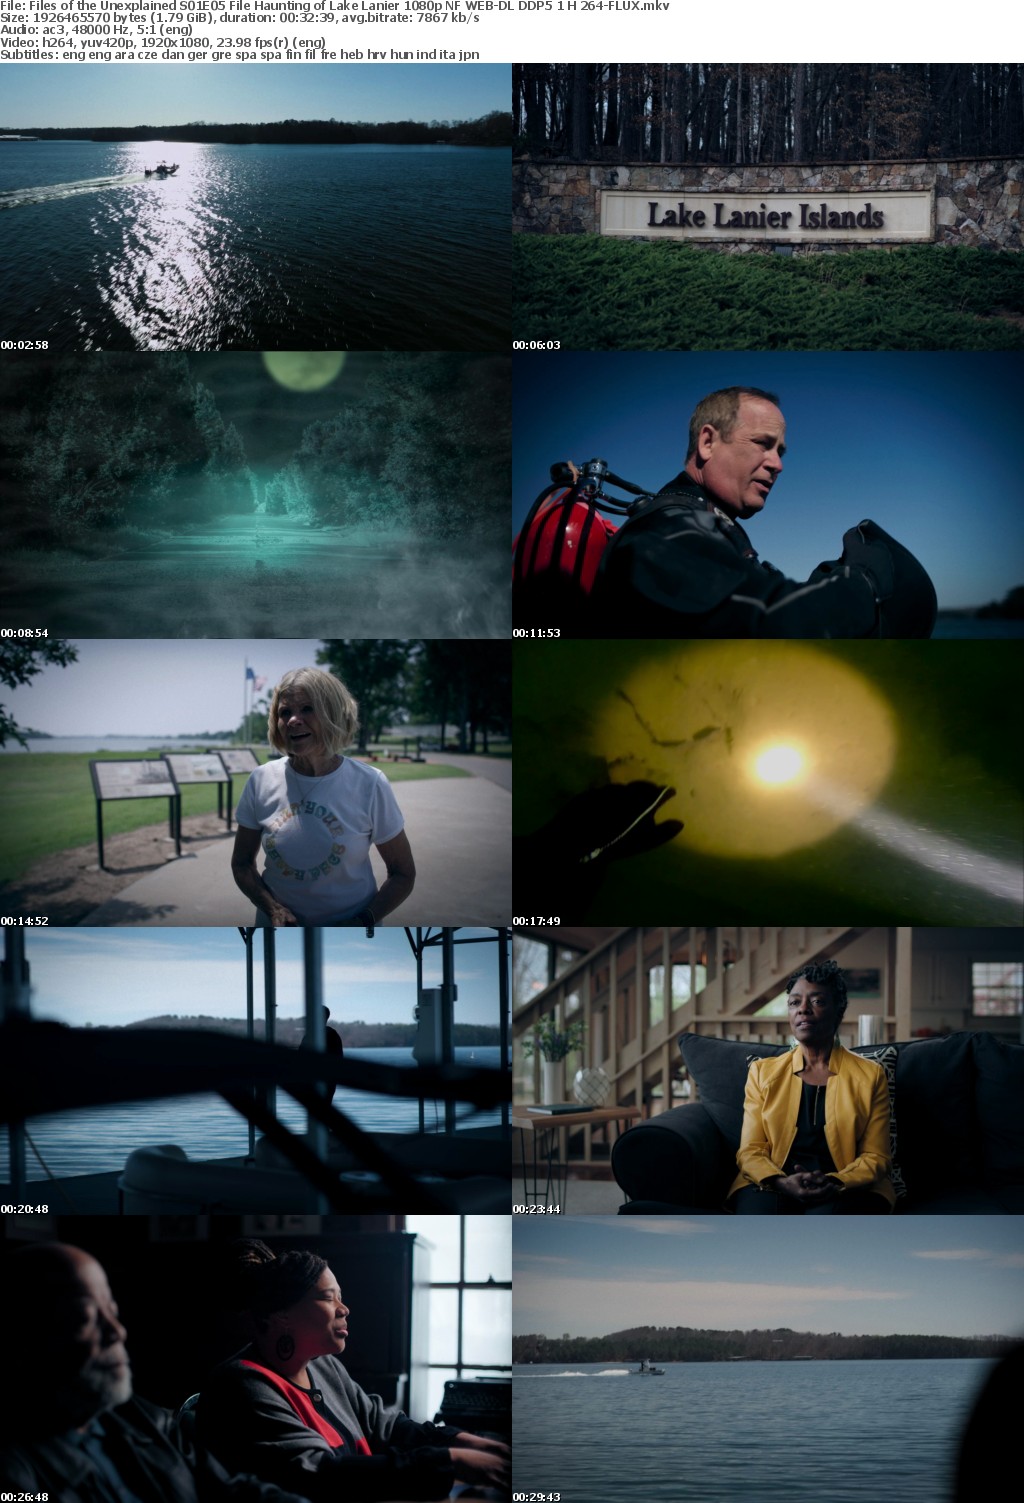 Files of the Unexplained S01E05 File Haunting of Lake Lanier 1080p NF WEB-DL DDP5 1 H 264-FLUX